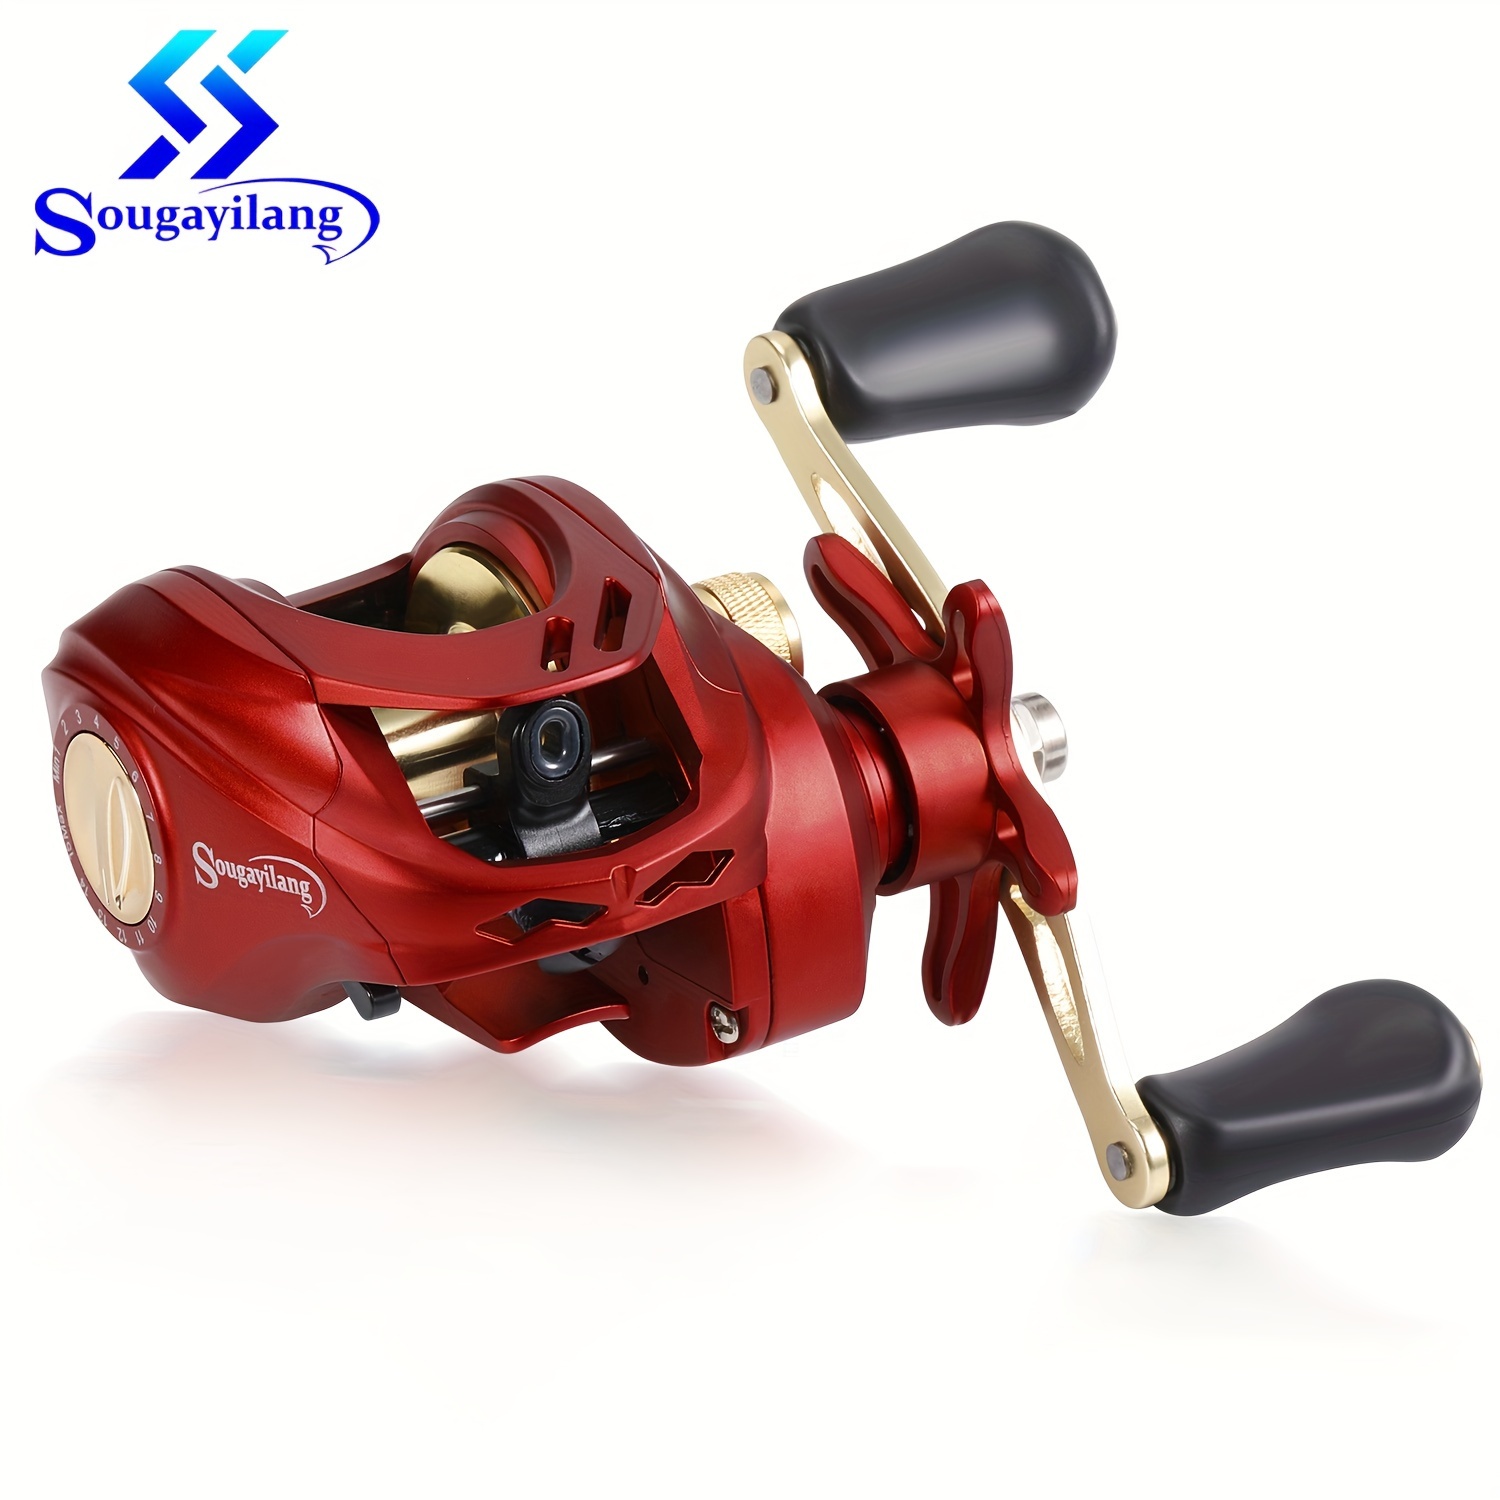 

Sougayilang Baitcasting Fishing Reel, 7.2:1 High Gear Ratio, 18+1ball Bearing, Left/right Optional Casting Reel For Trout Pike Bass